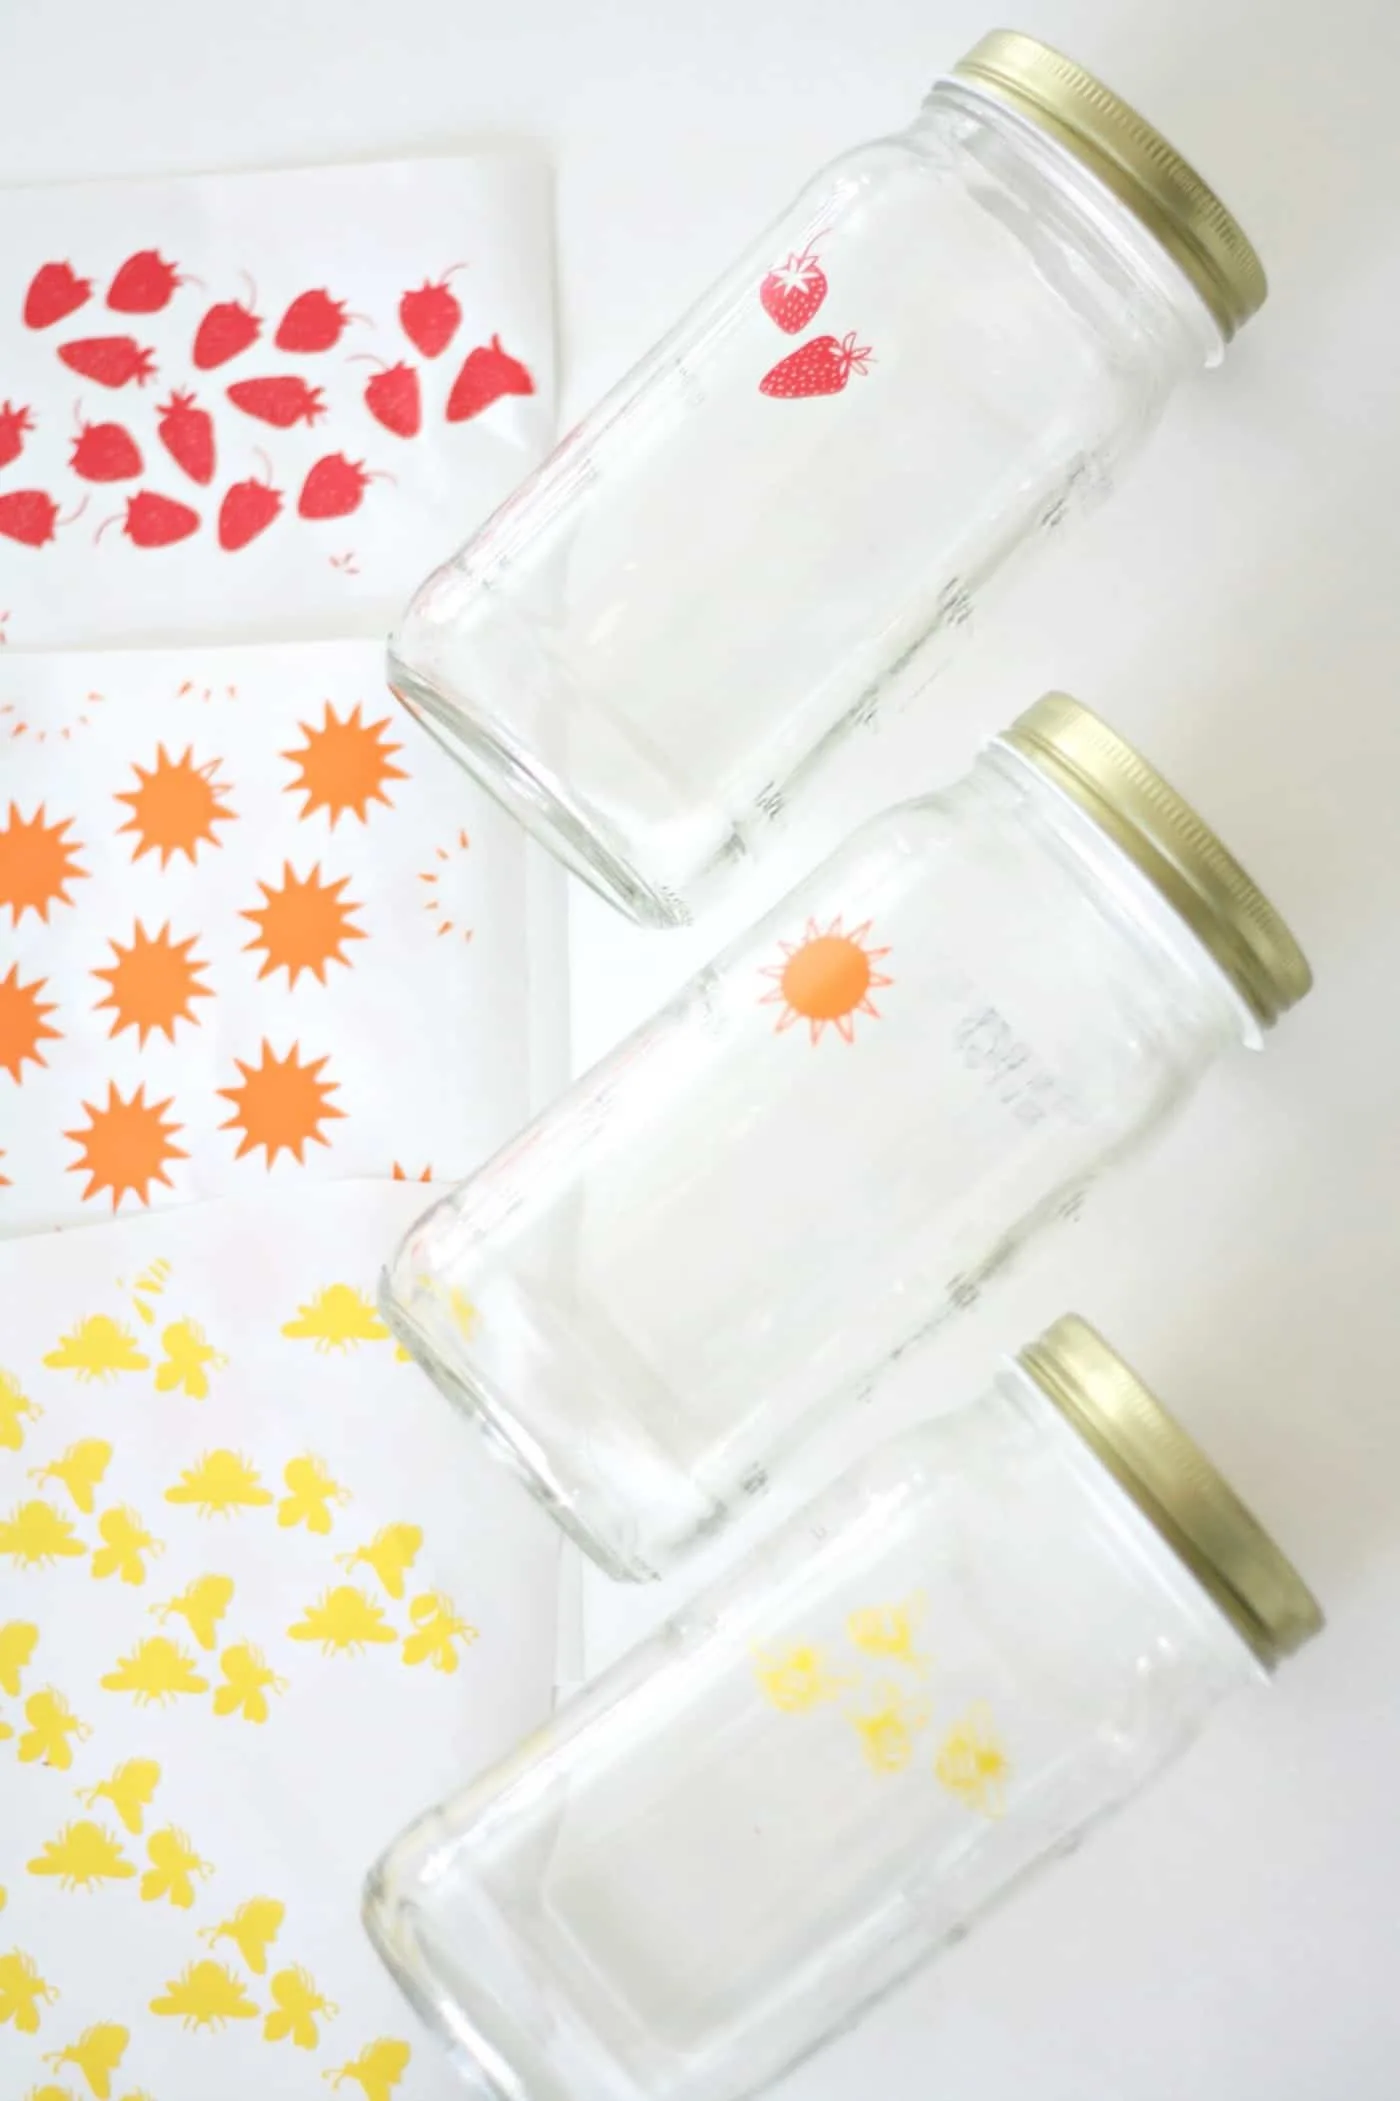 Simple Glass Jar Crafts for Summer (Too Cute!) - DIY Candy